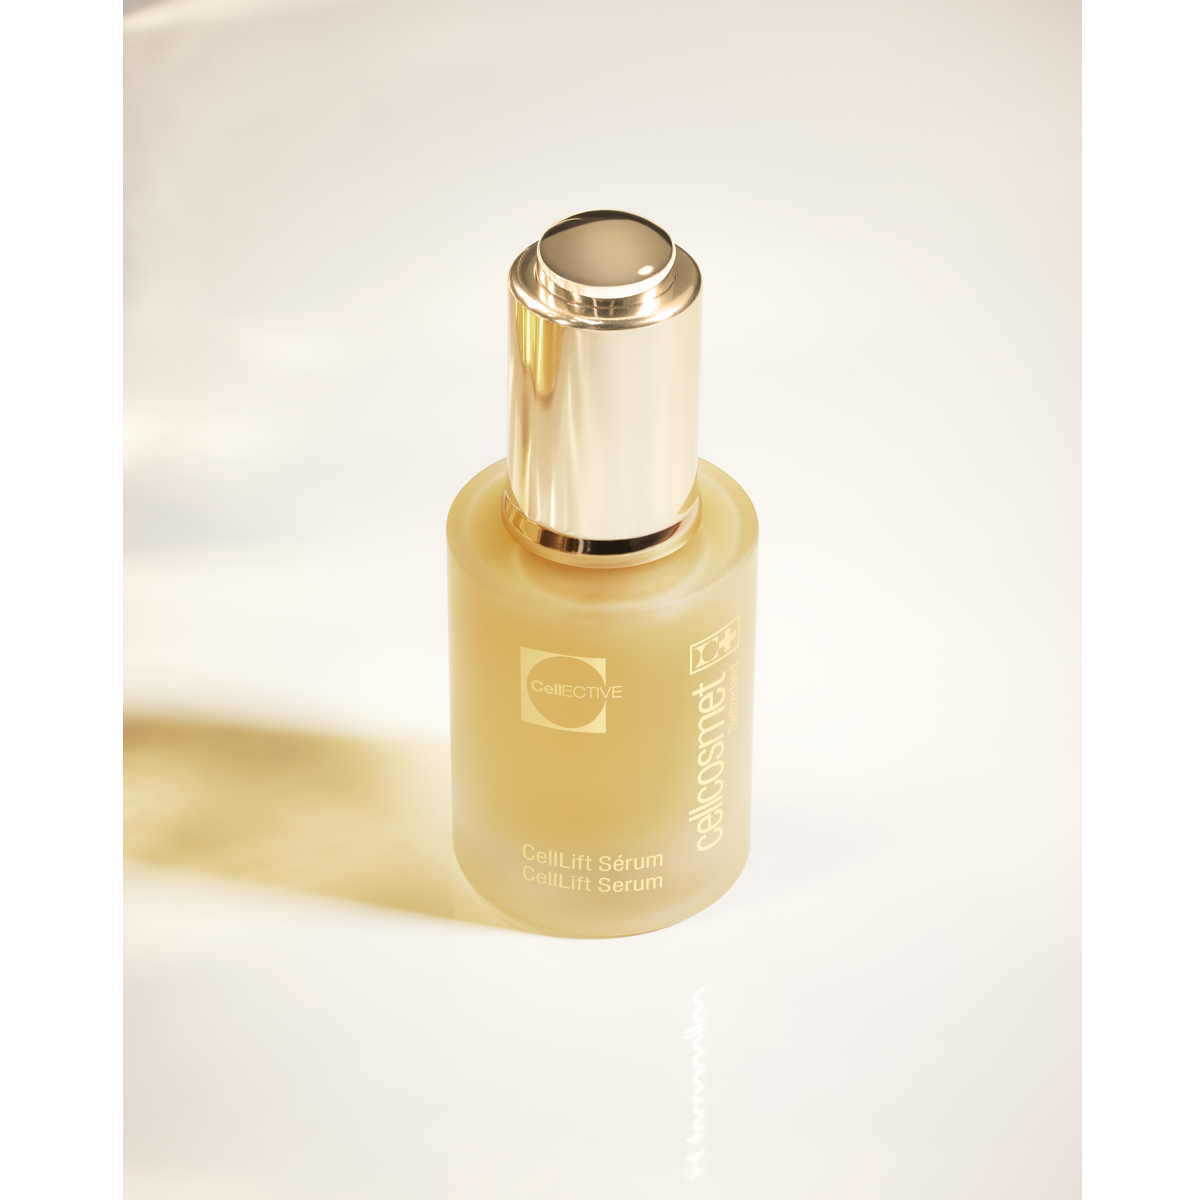 cellcosmet celllift serum product image, gold bottle with dropper 